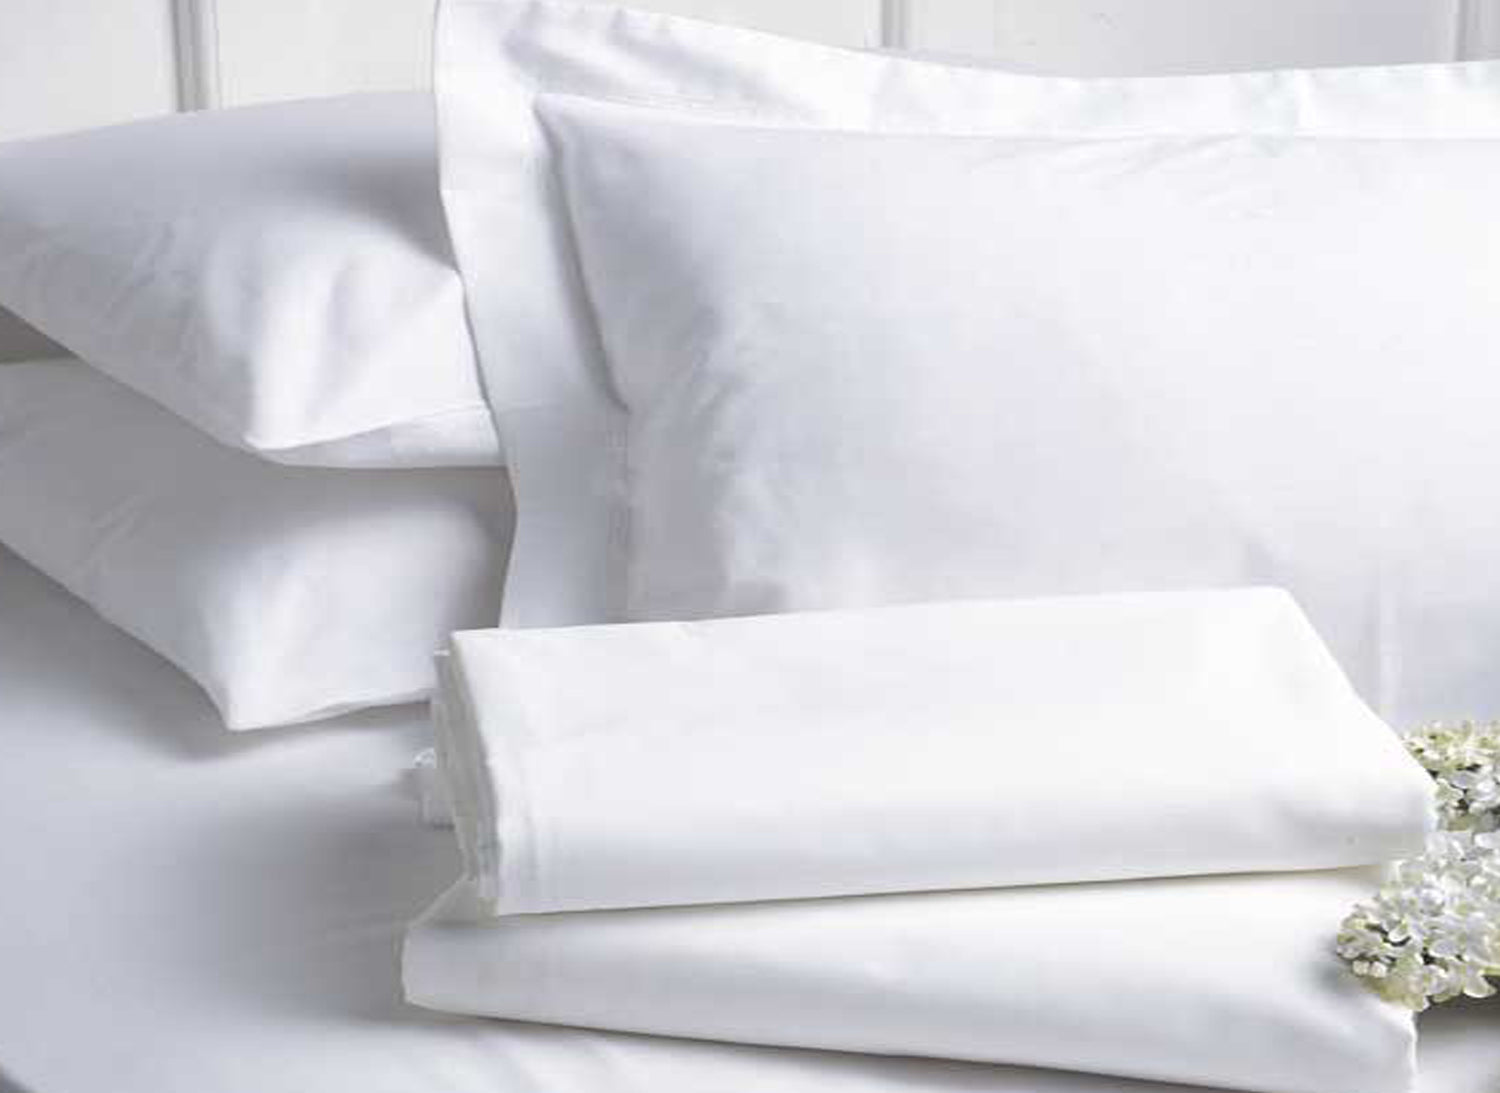 Luxurious hotel bedding set size for two people